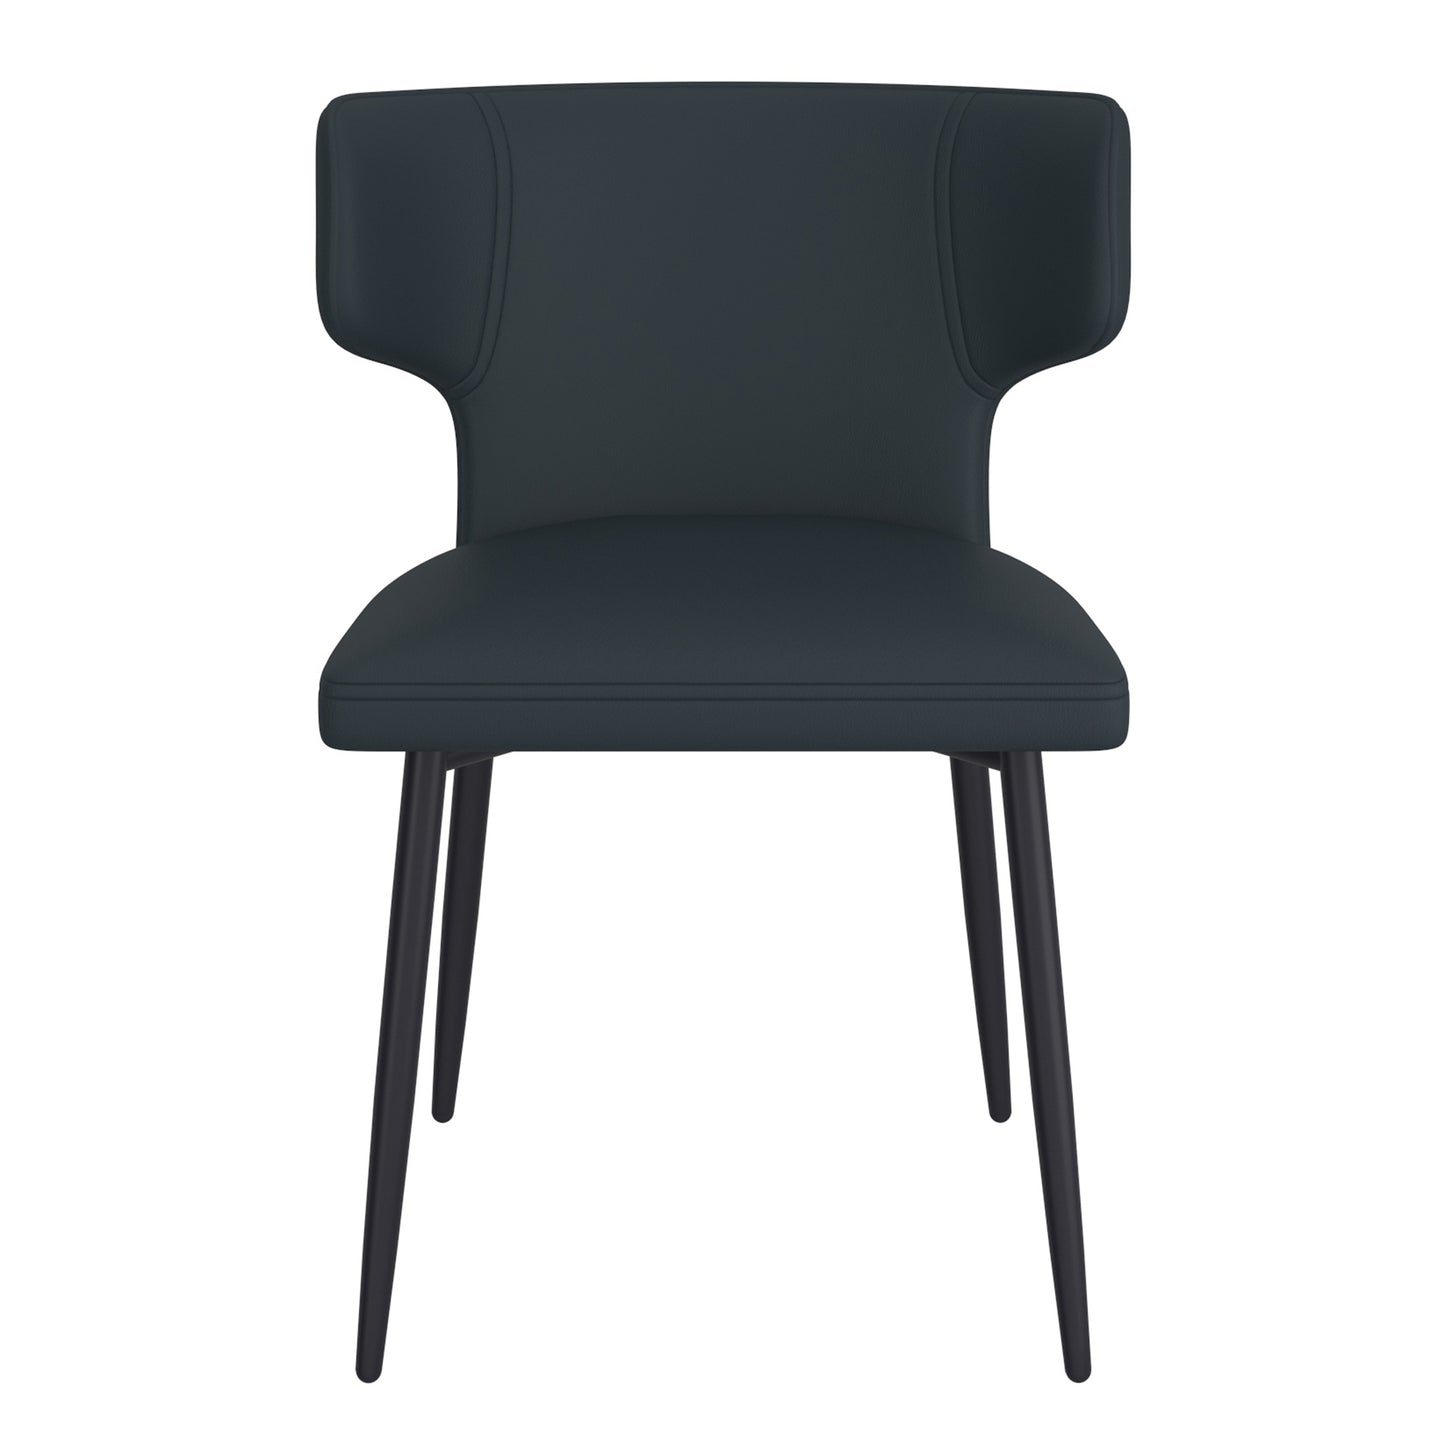 Olis Dining Chair, Set of 2, in Black Faux Leather and Black